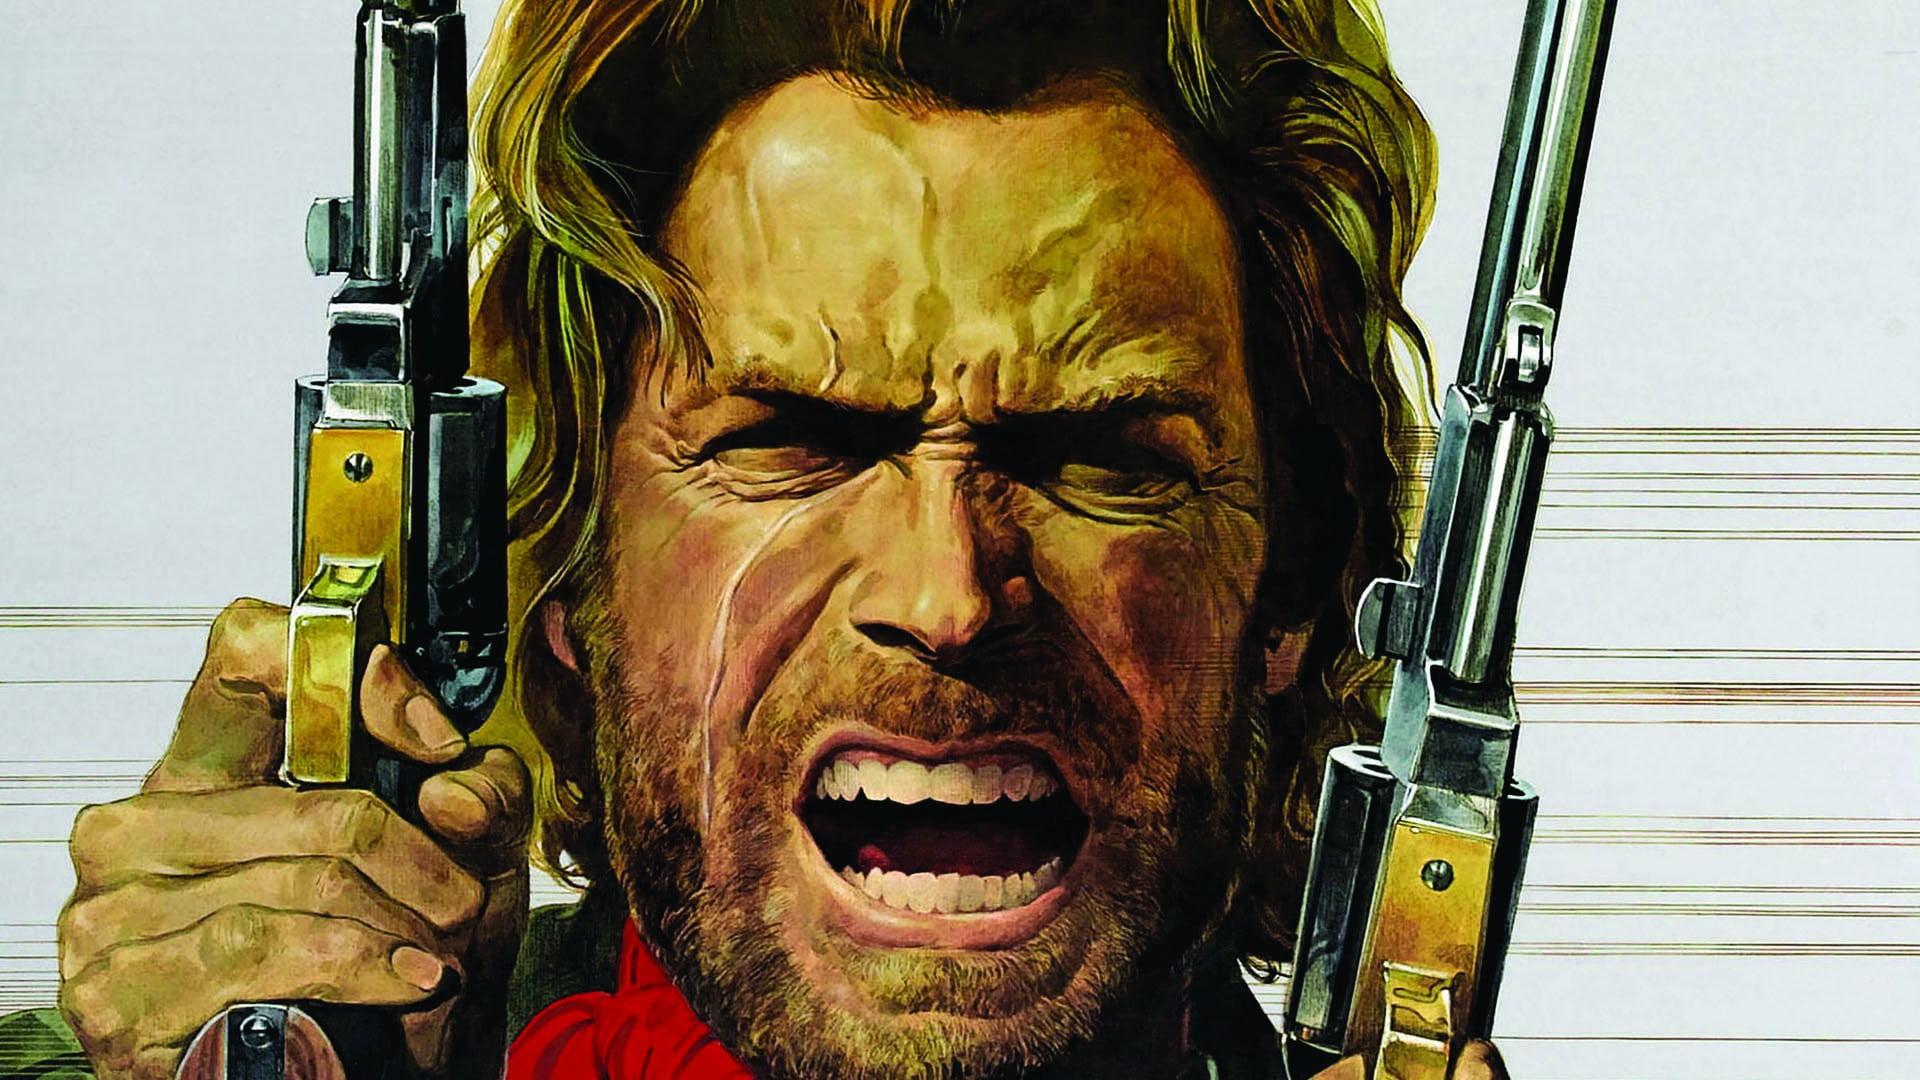 man holding two revolvers illustration, Clint Eastwood, movies, western, drawing